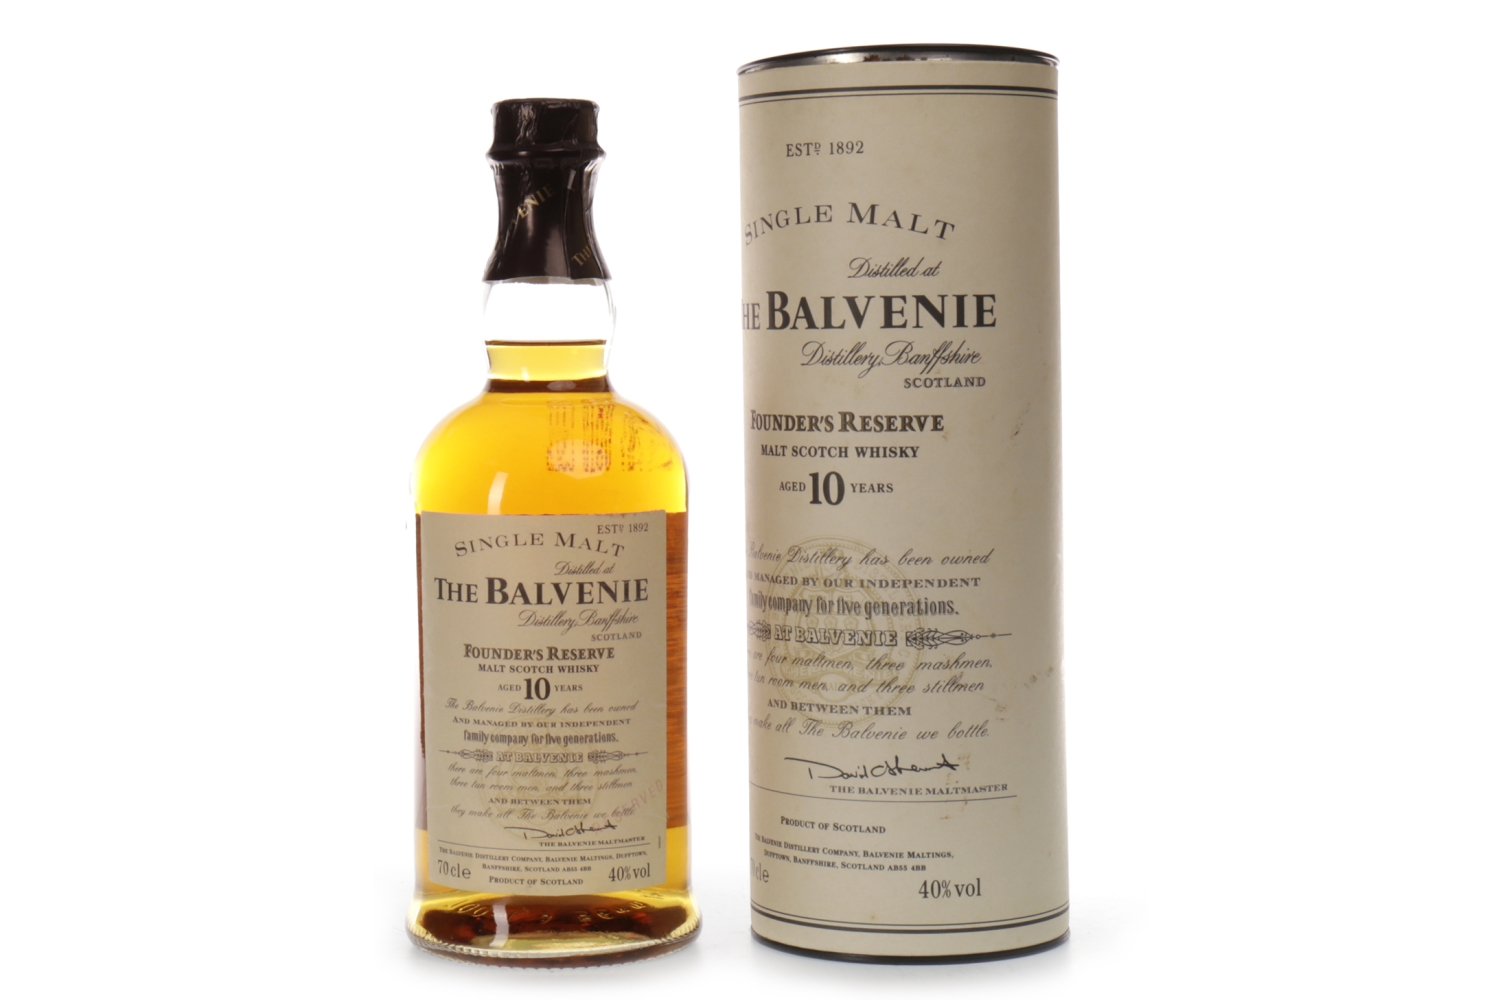 BALVENIE FOUNDER'S RESERVE AGED 10 YEARS Active. Dufftown, Banffshire. 70cl, 40% volume, in tube.